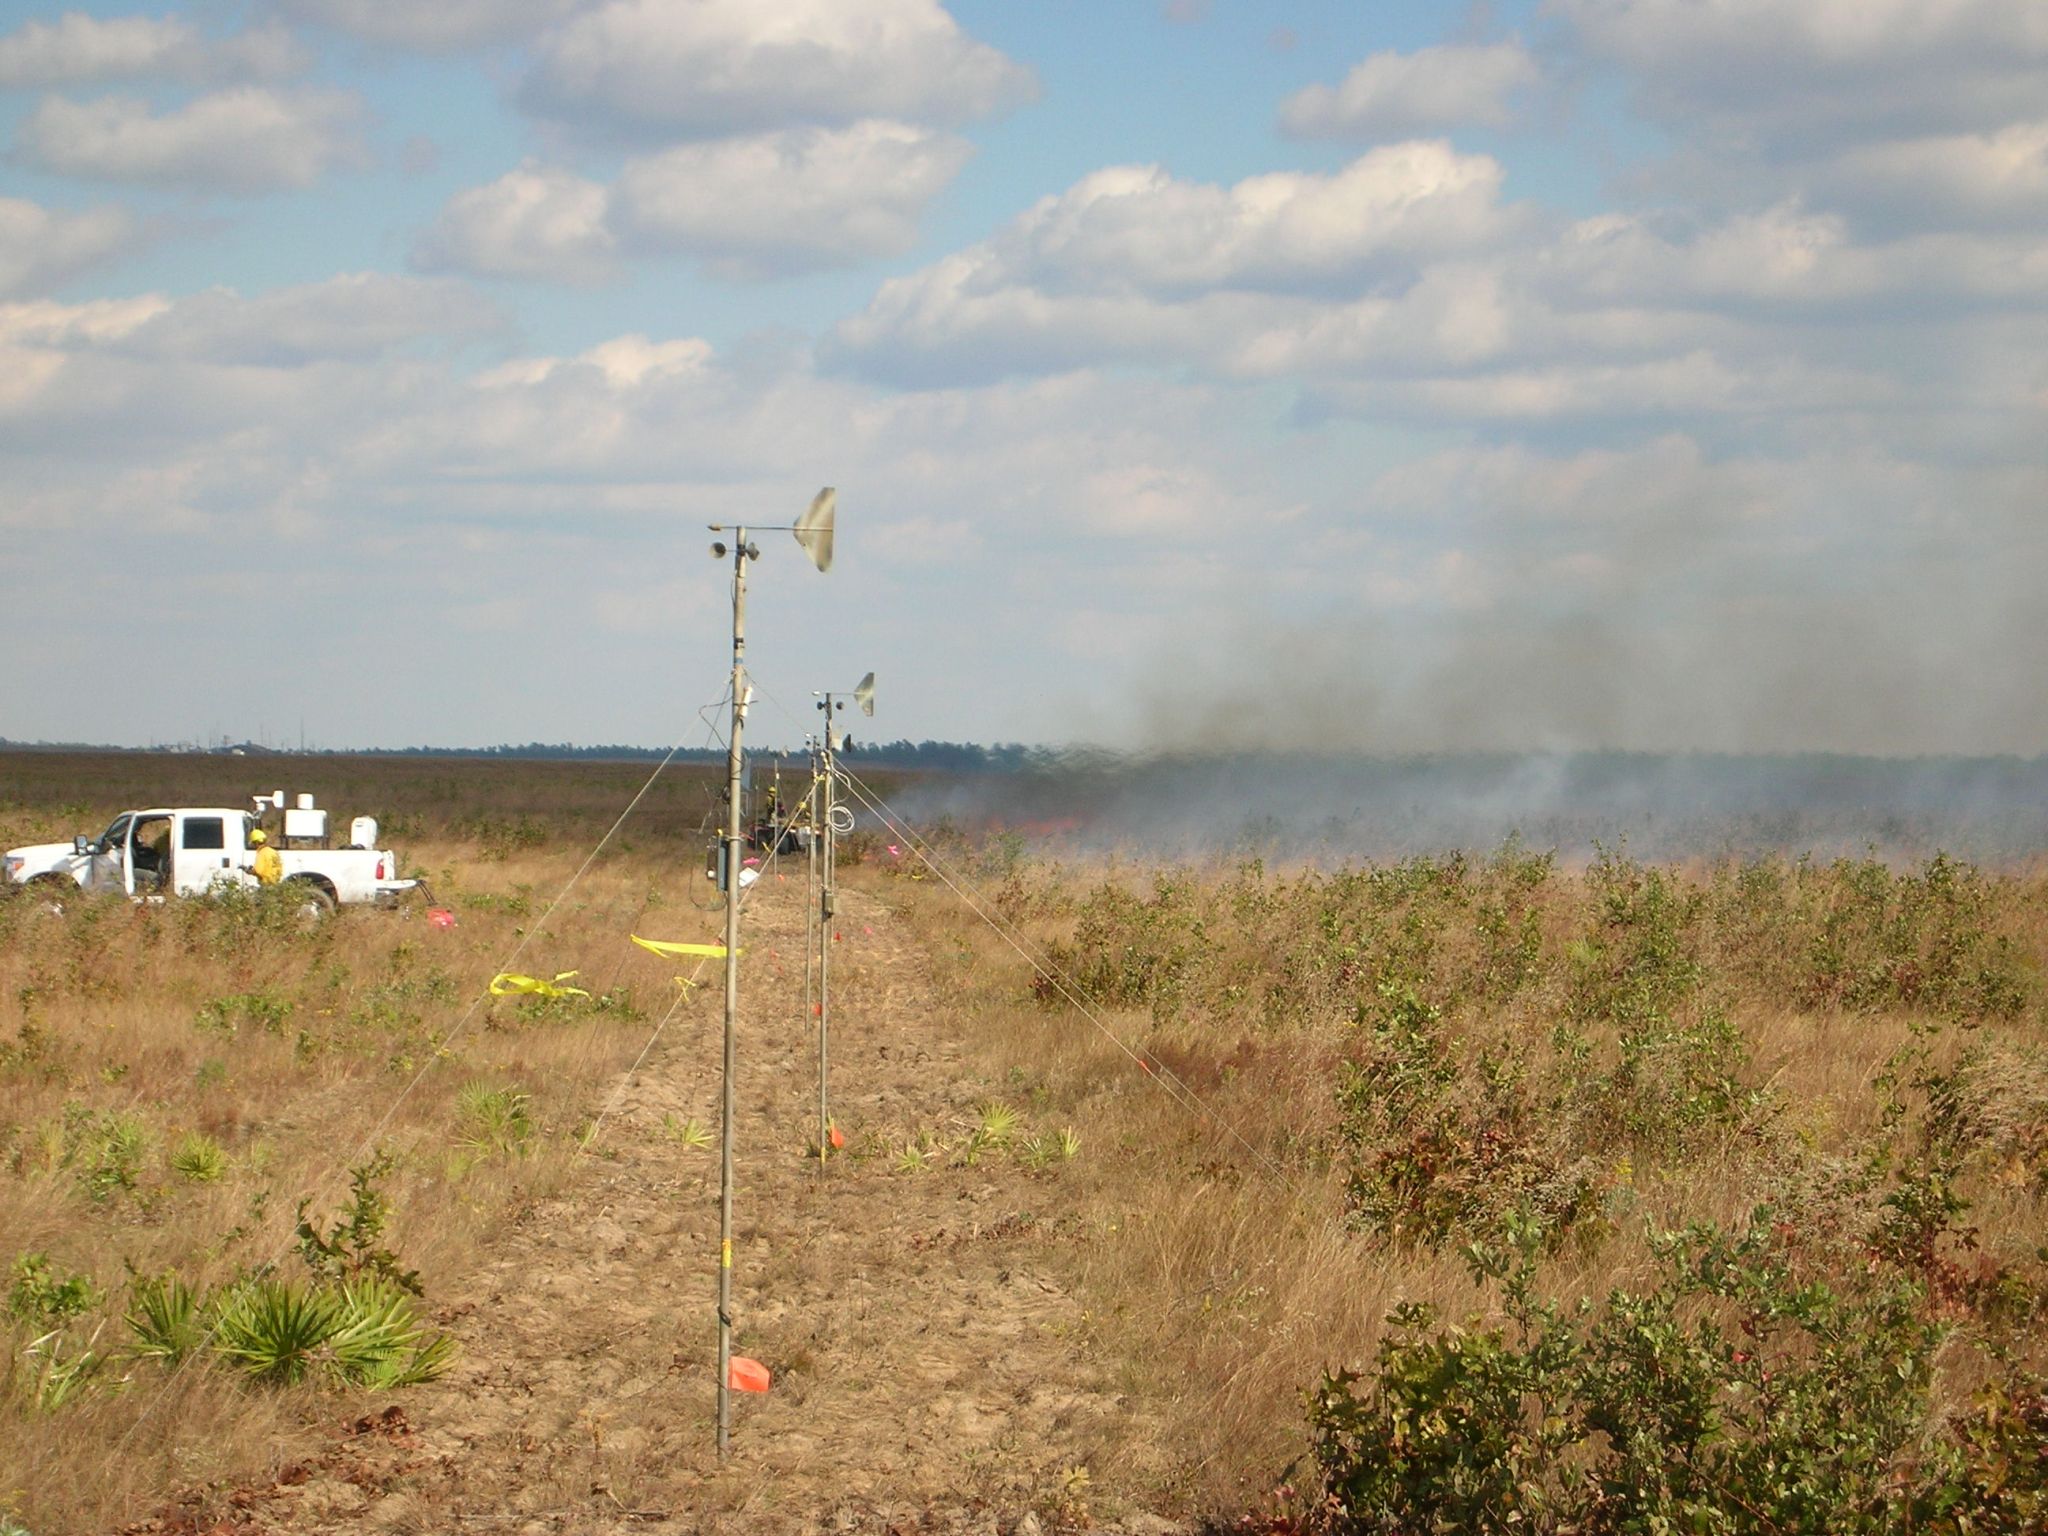 Fire being set by a fire boss riding on an off-road vehicle fairly visible in line with and beyond the wind vanes.